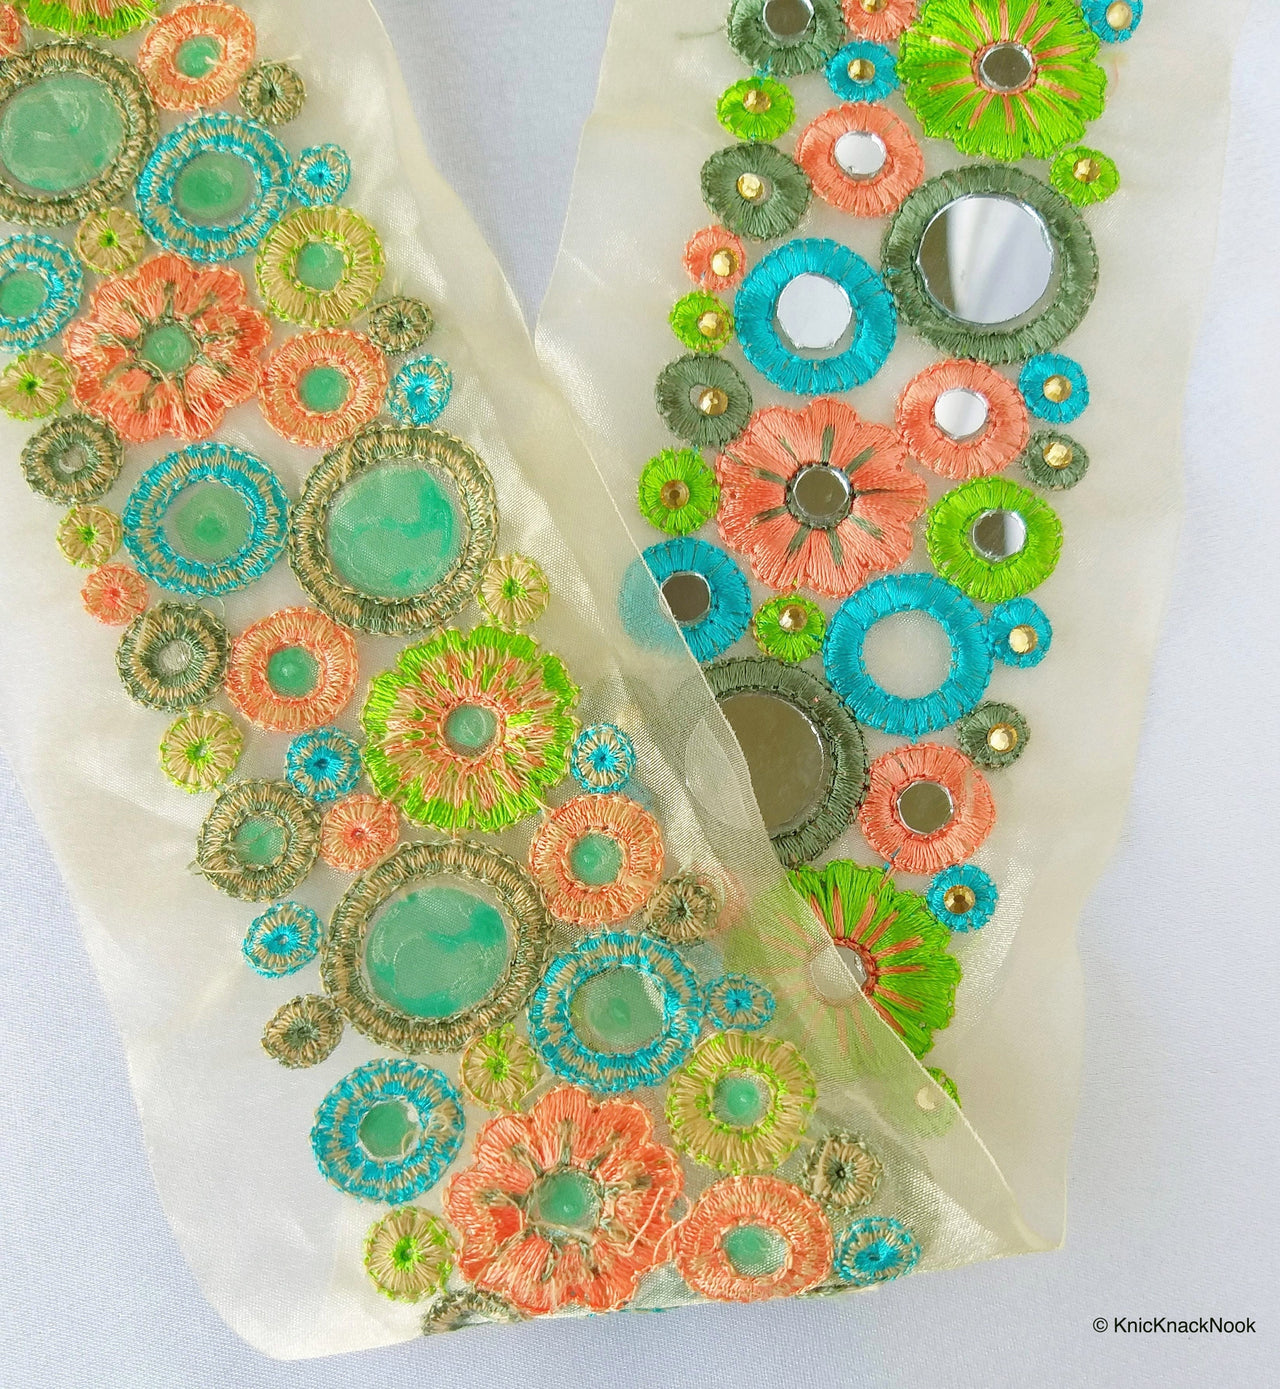 Gold Sheer Tissue Fabric Trim With Coral, Blue And Green Circles and Floral Embroidery With Mirror Trim, Decorative Mirrored Trim